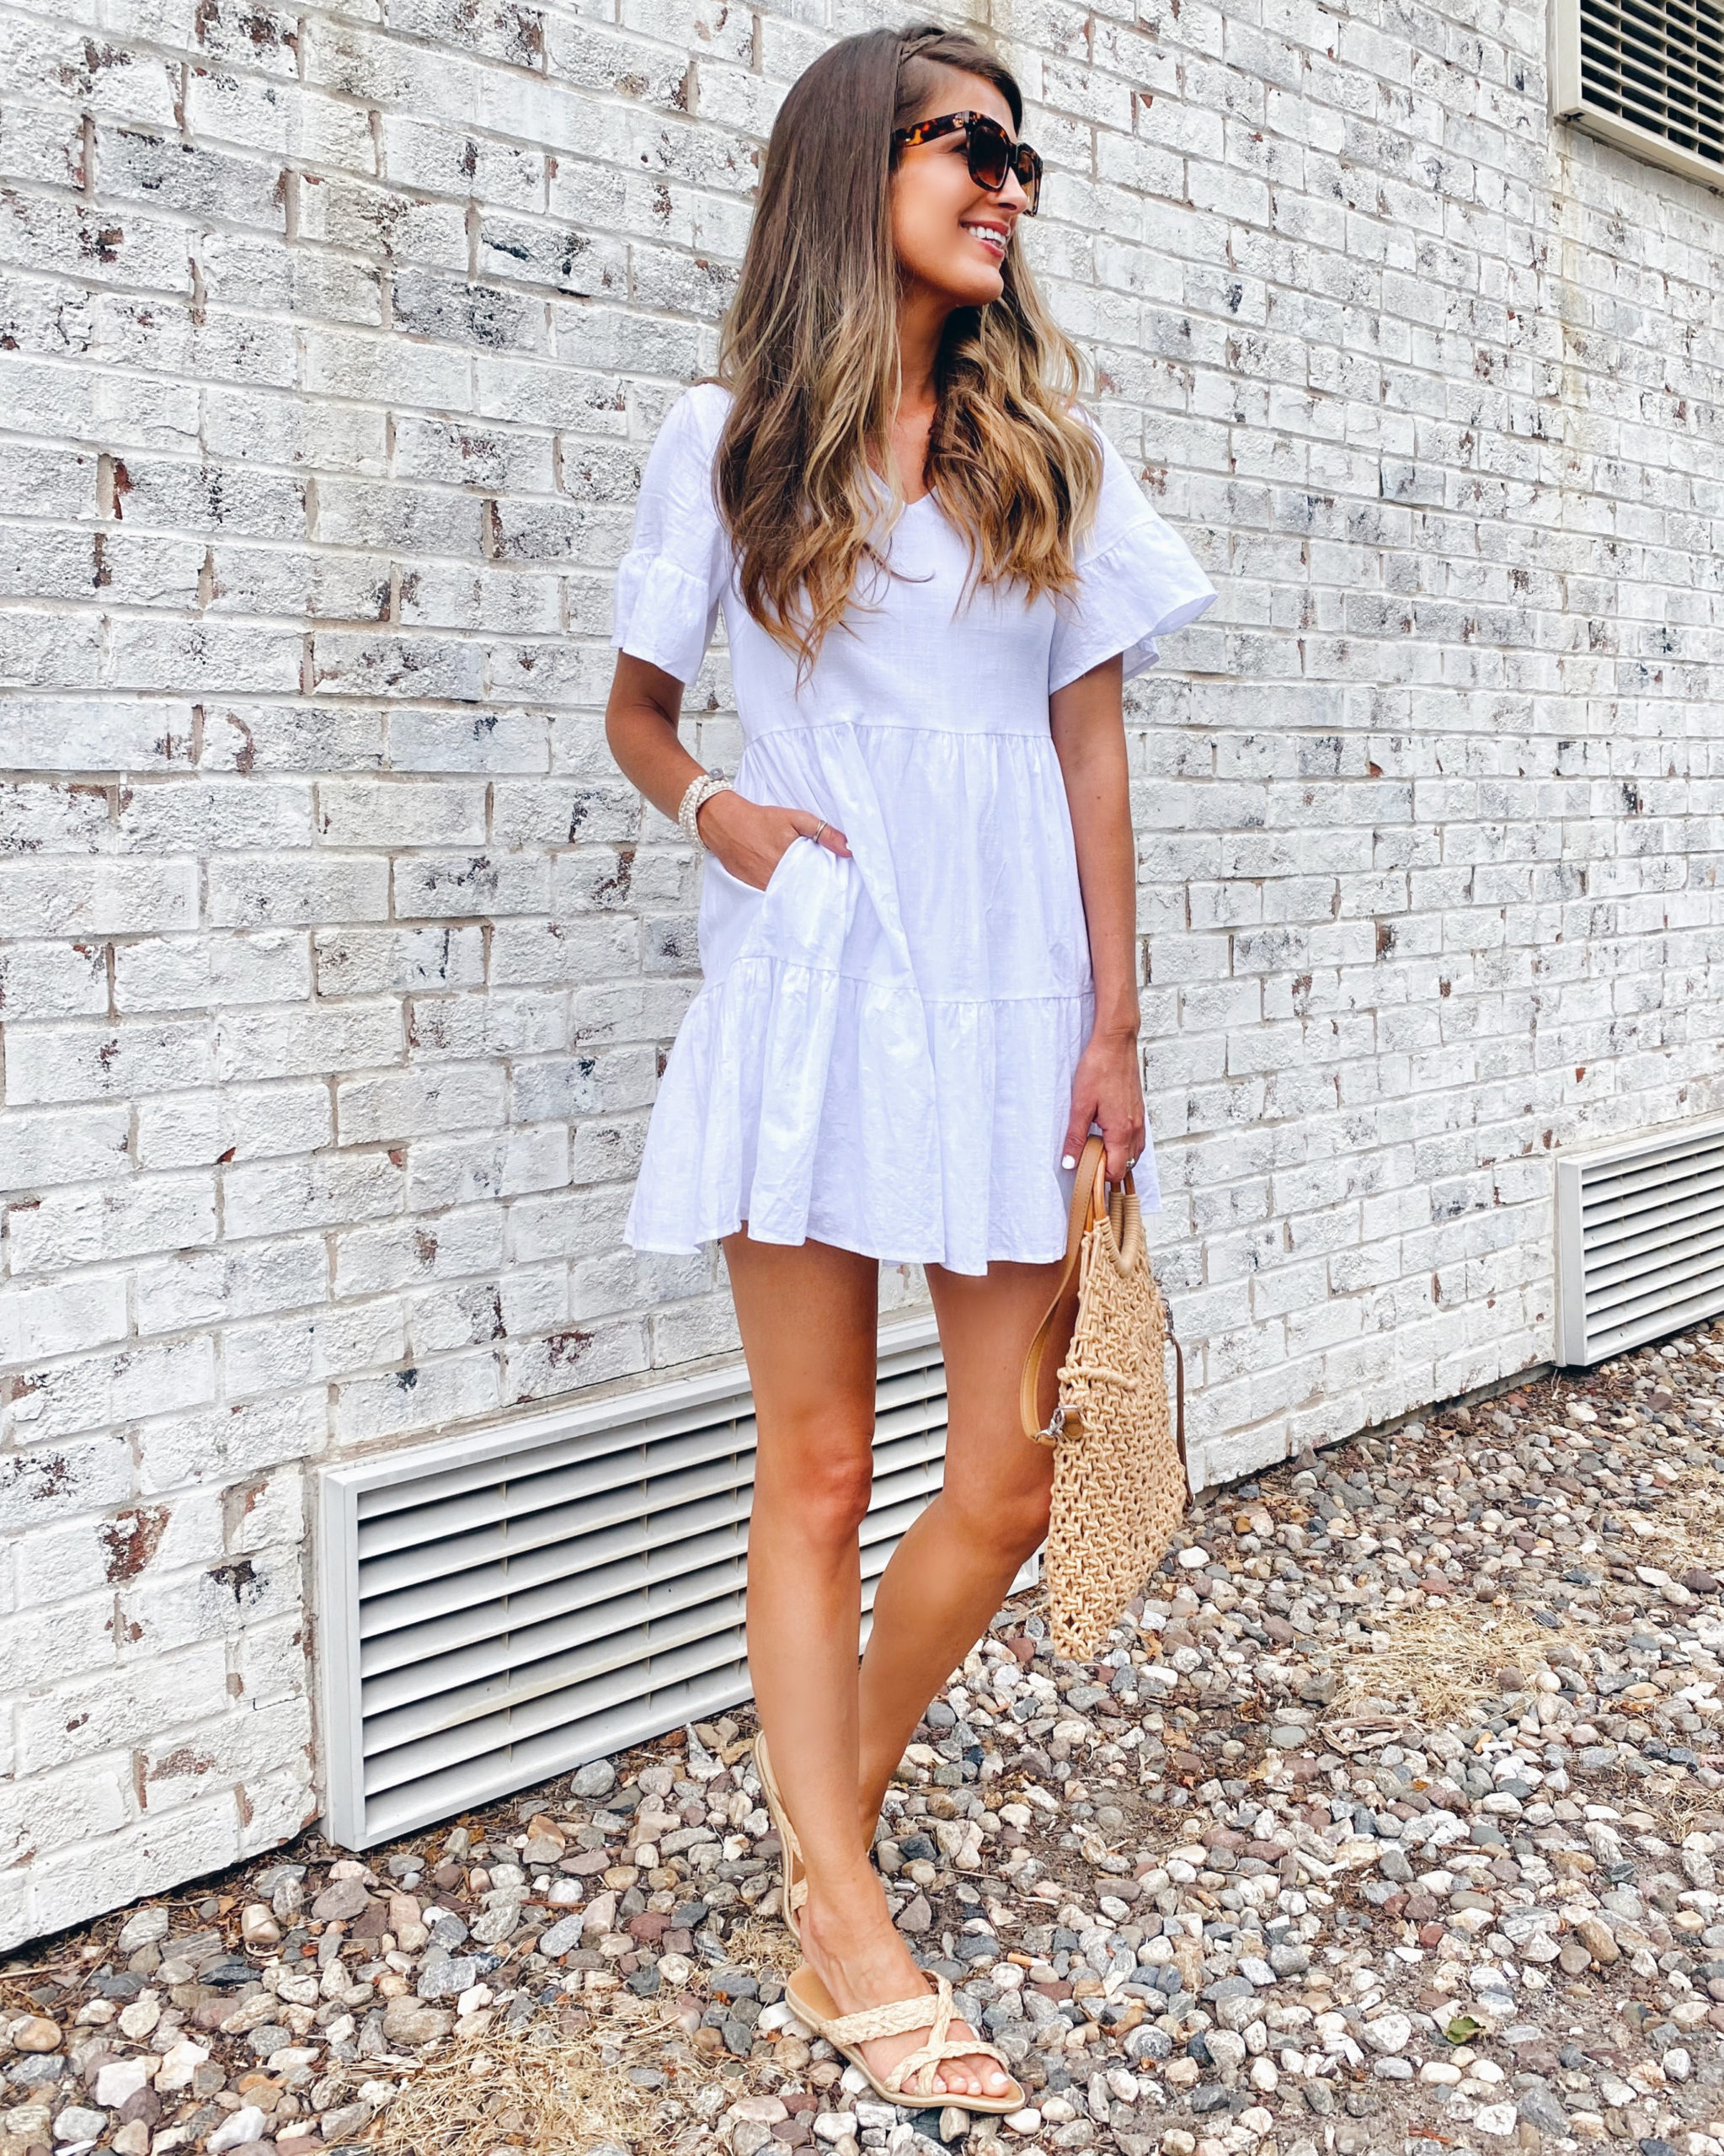 summer white outfit - dress and heeled espadrilles  Espadrilles outfit,  White summer outfits, Summer outfits